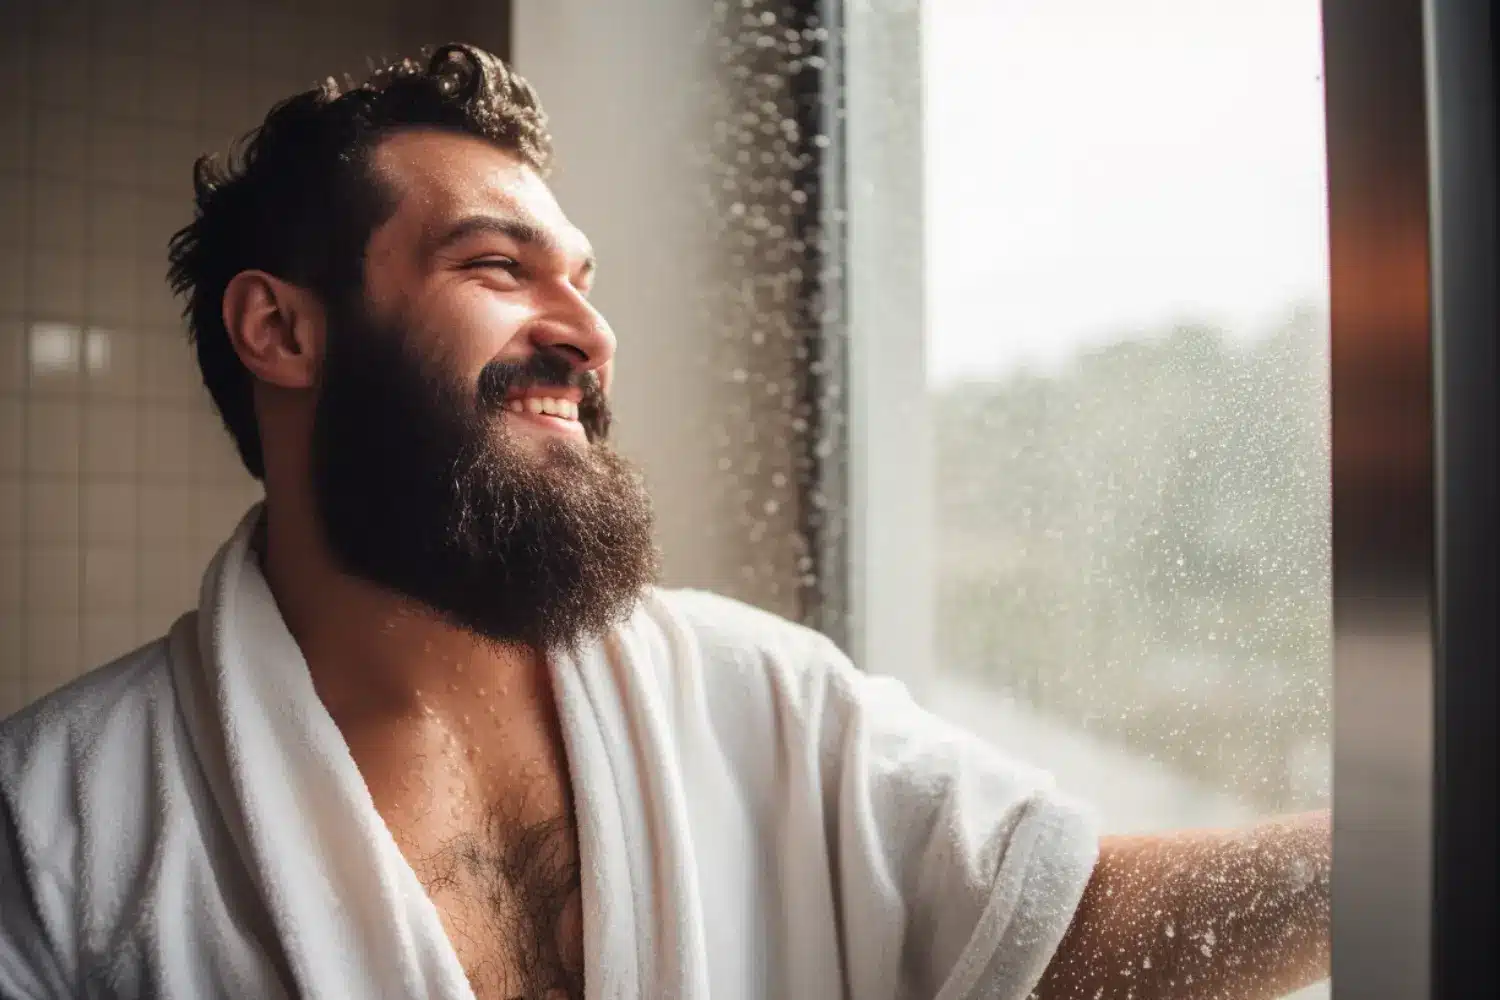 man smiling standing in shower with bathrobe